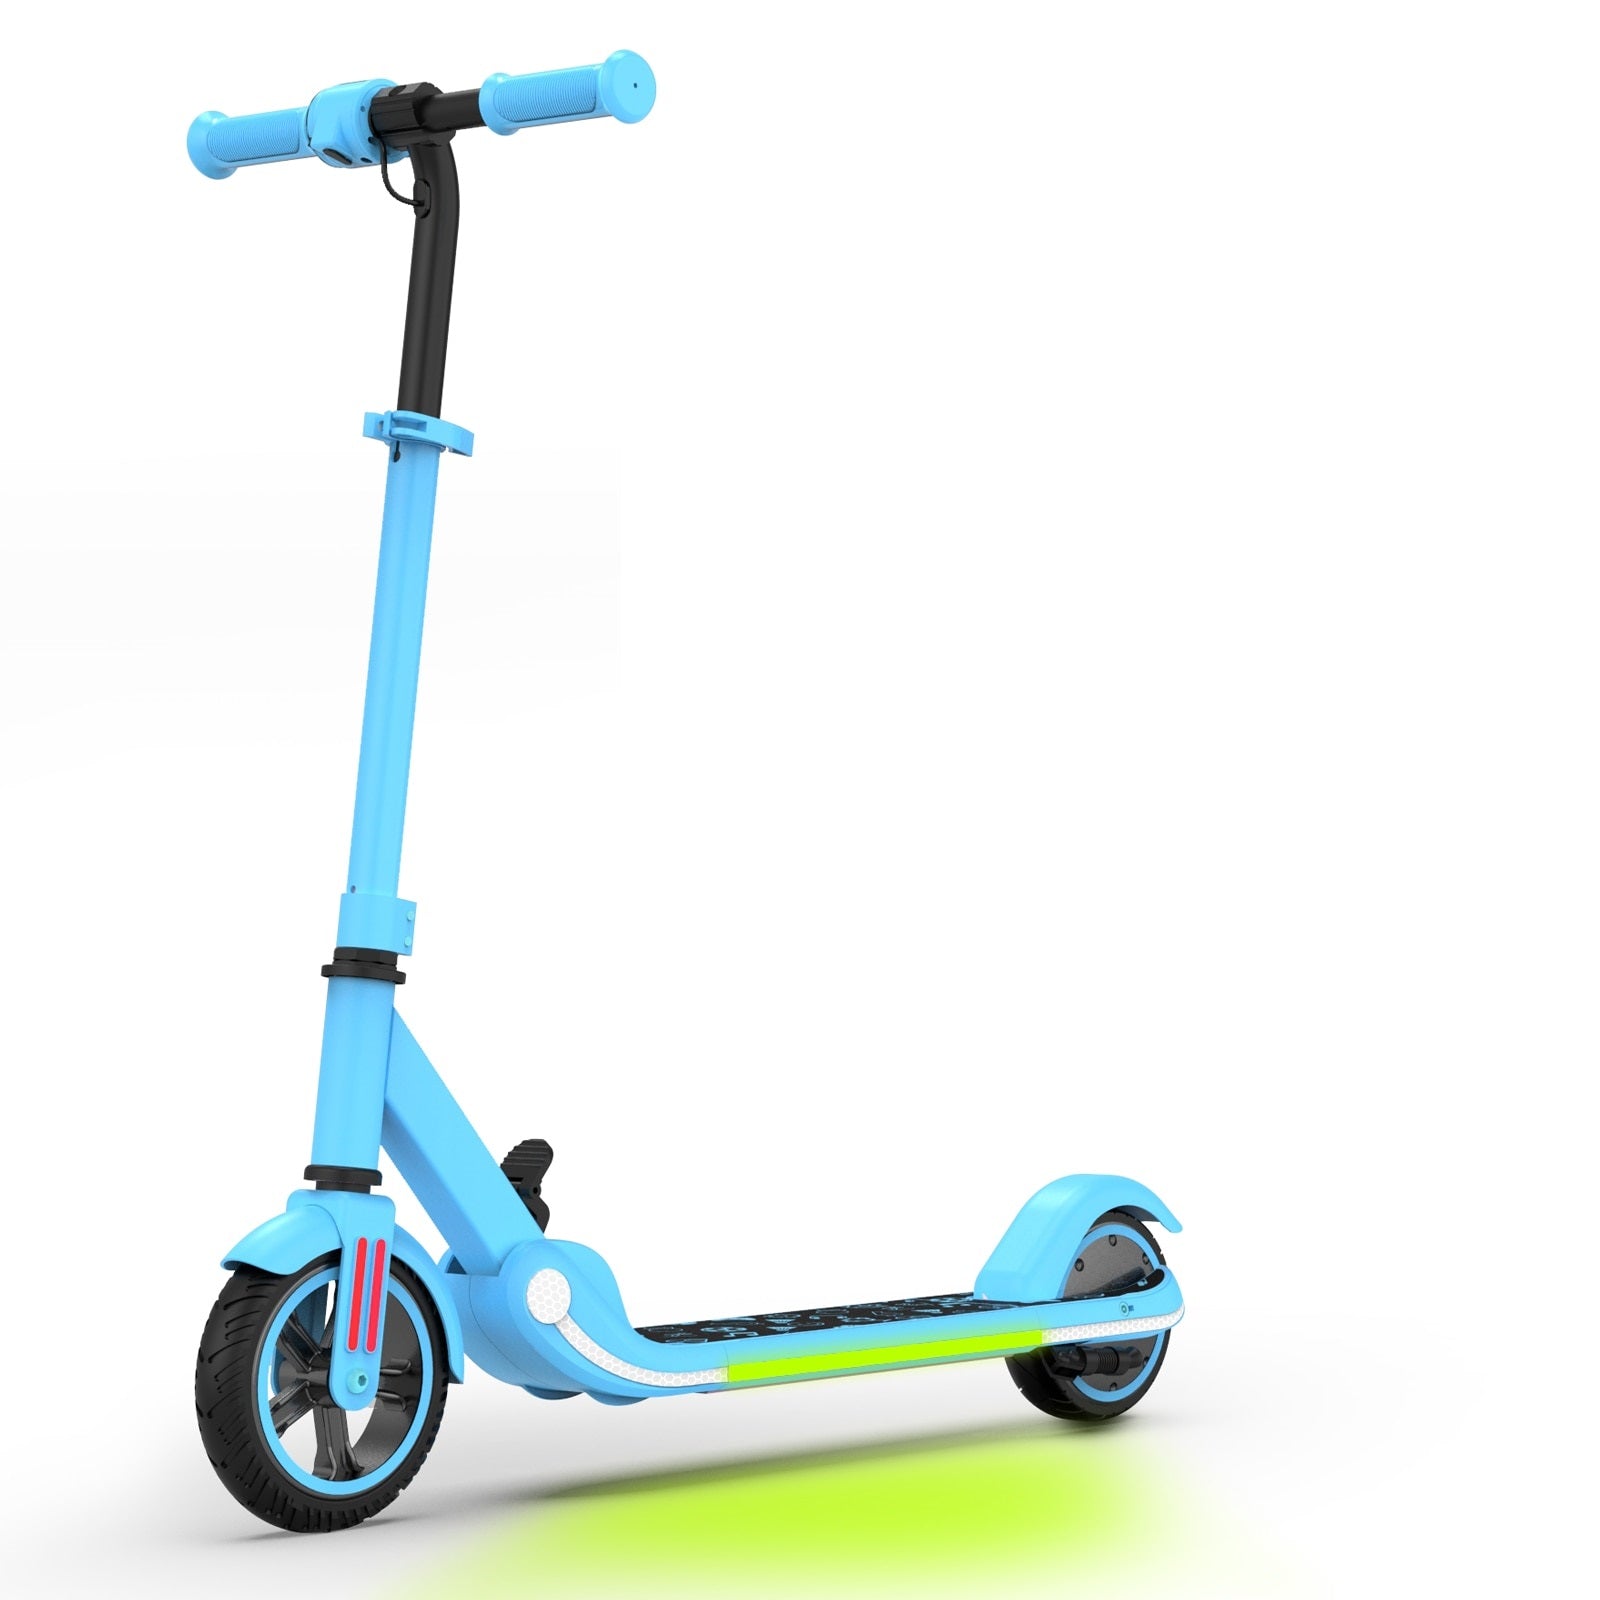 Foldable Electric Scooter For Kids - iSmart Home Gadgets Limitedelectric scooter for teens | foldable electric scooter | foldable electric scooter for kids